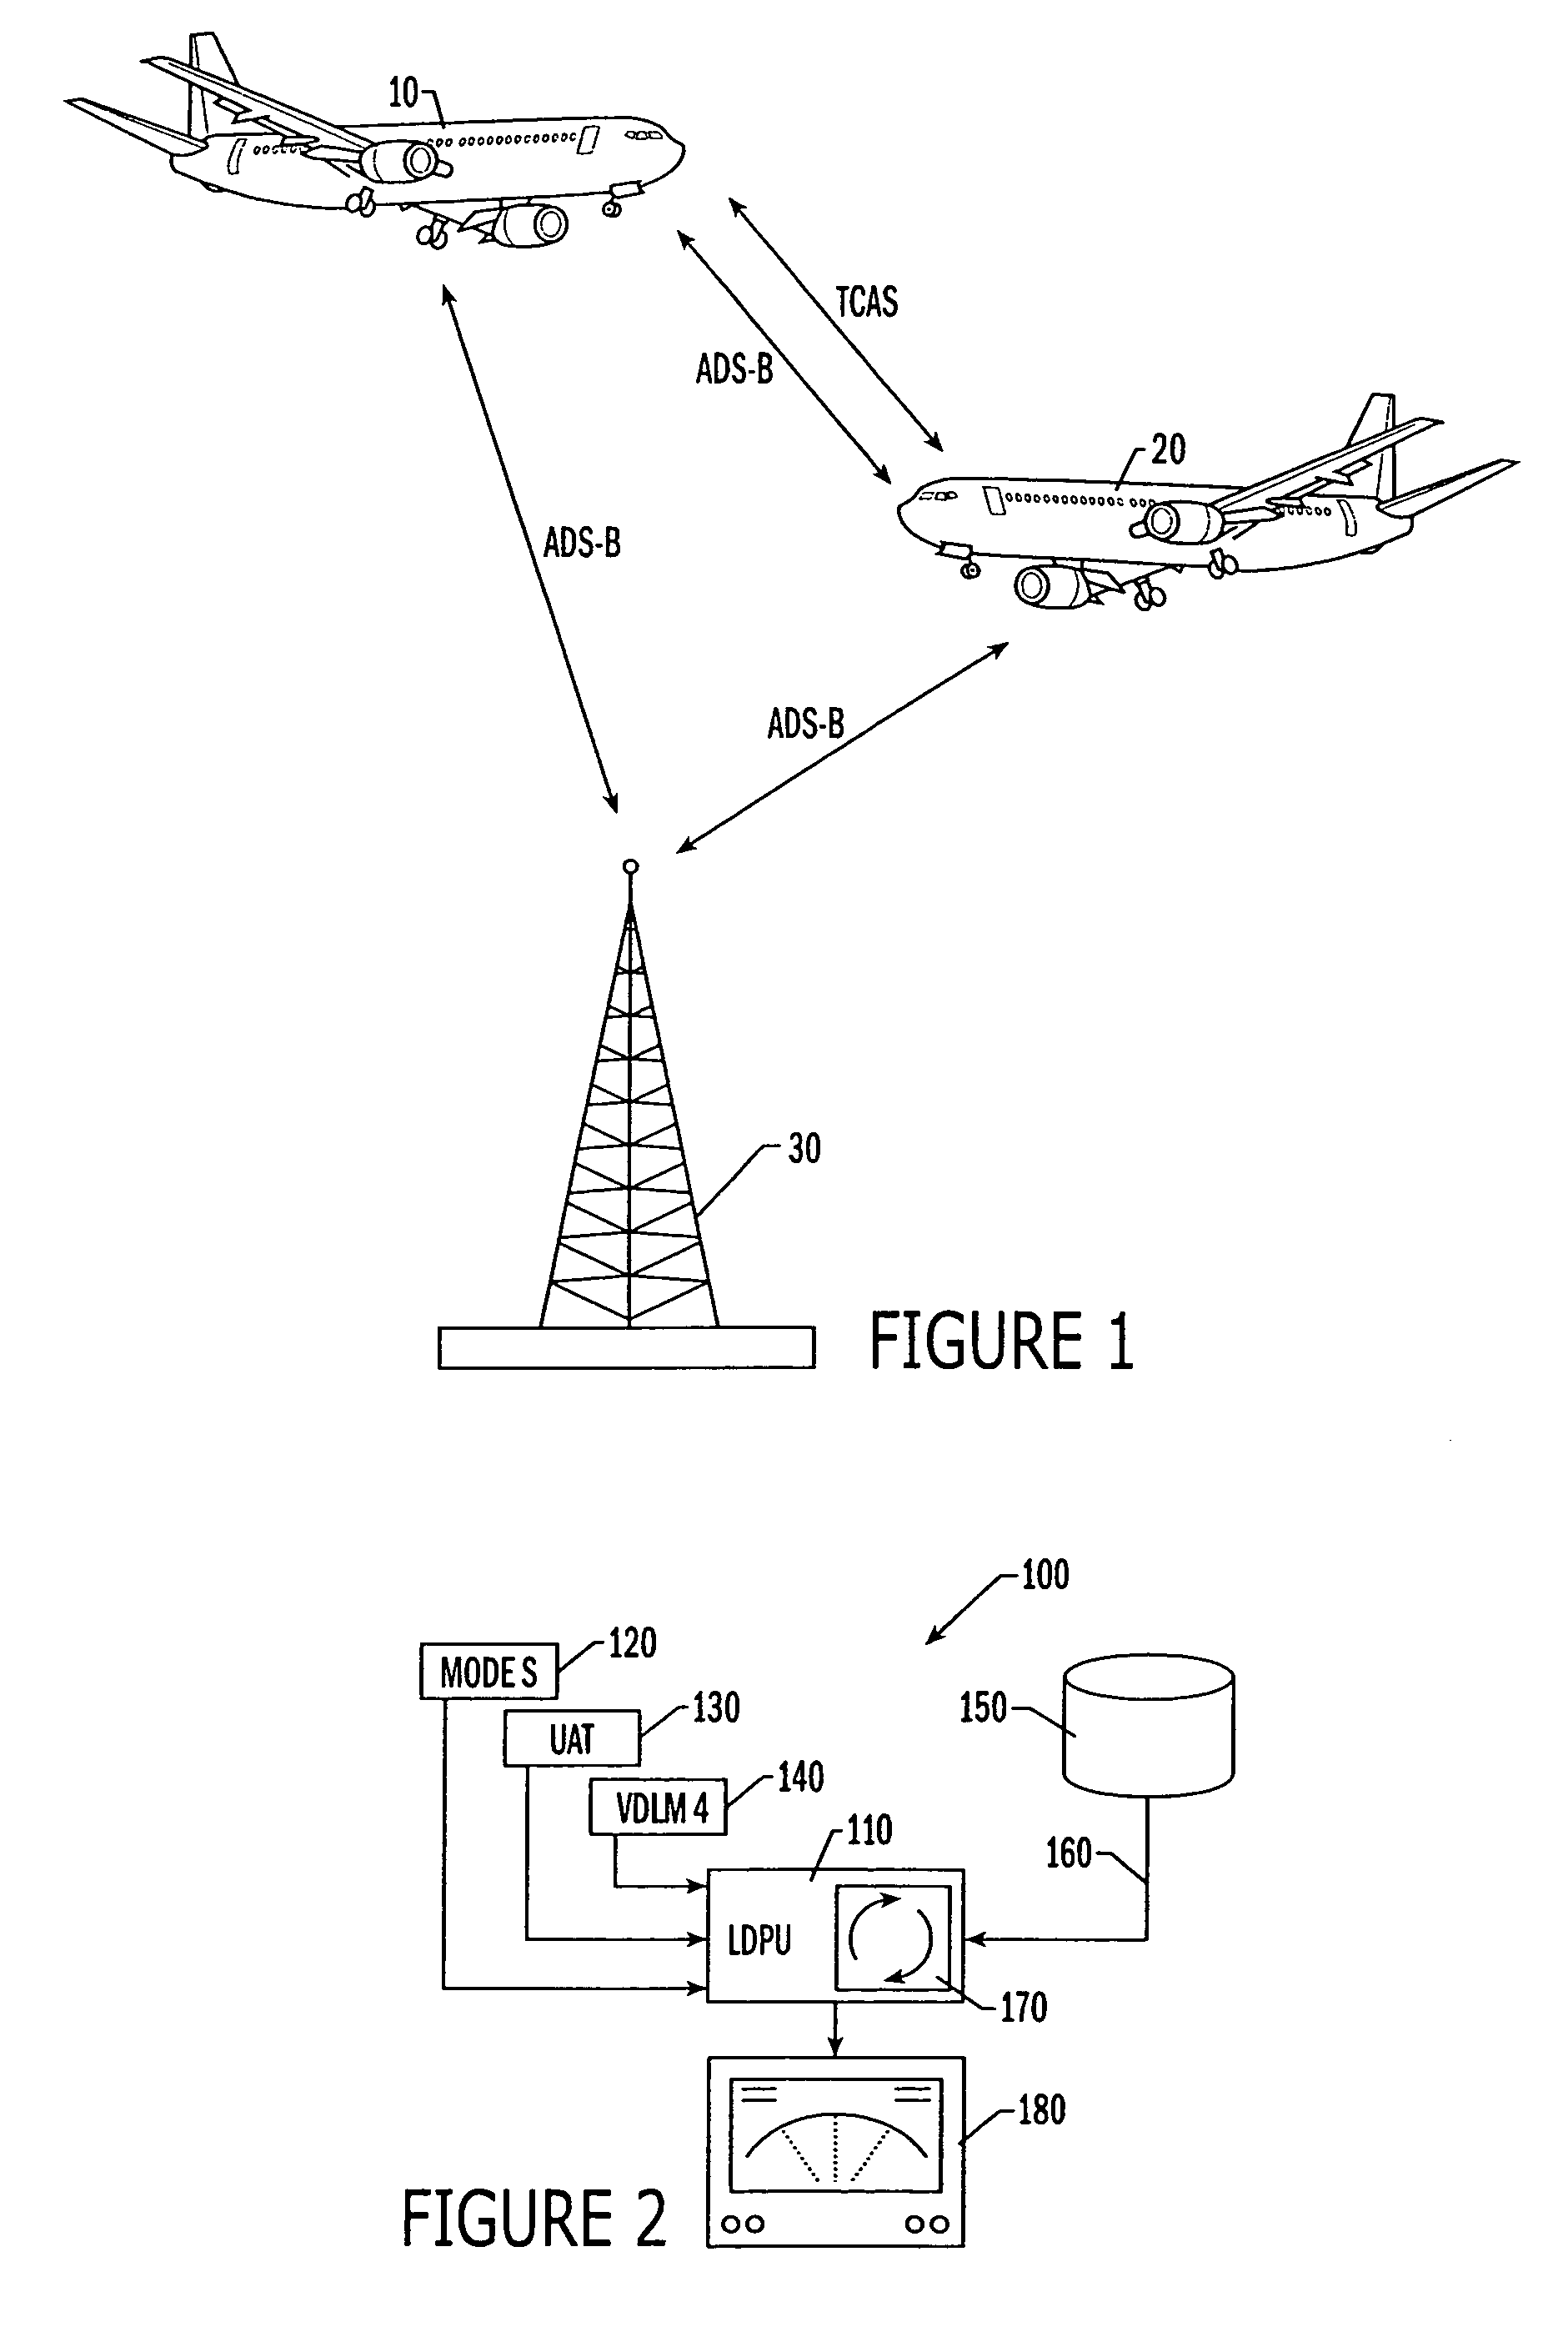 Systems and methods for correlation in an air traffic control system of interrogation-based target positional data and GPS-based intruder positional data